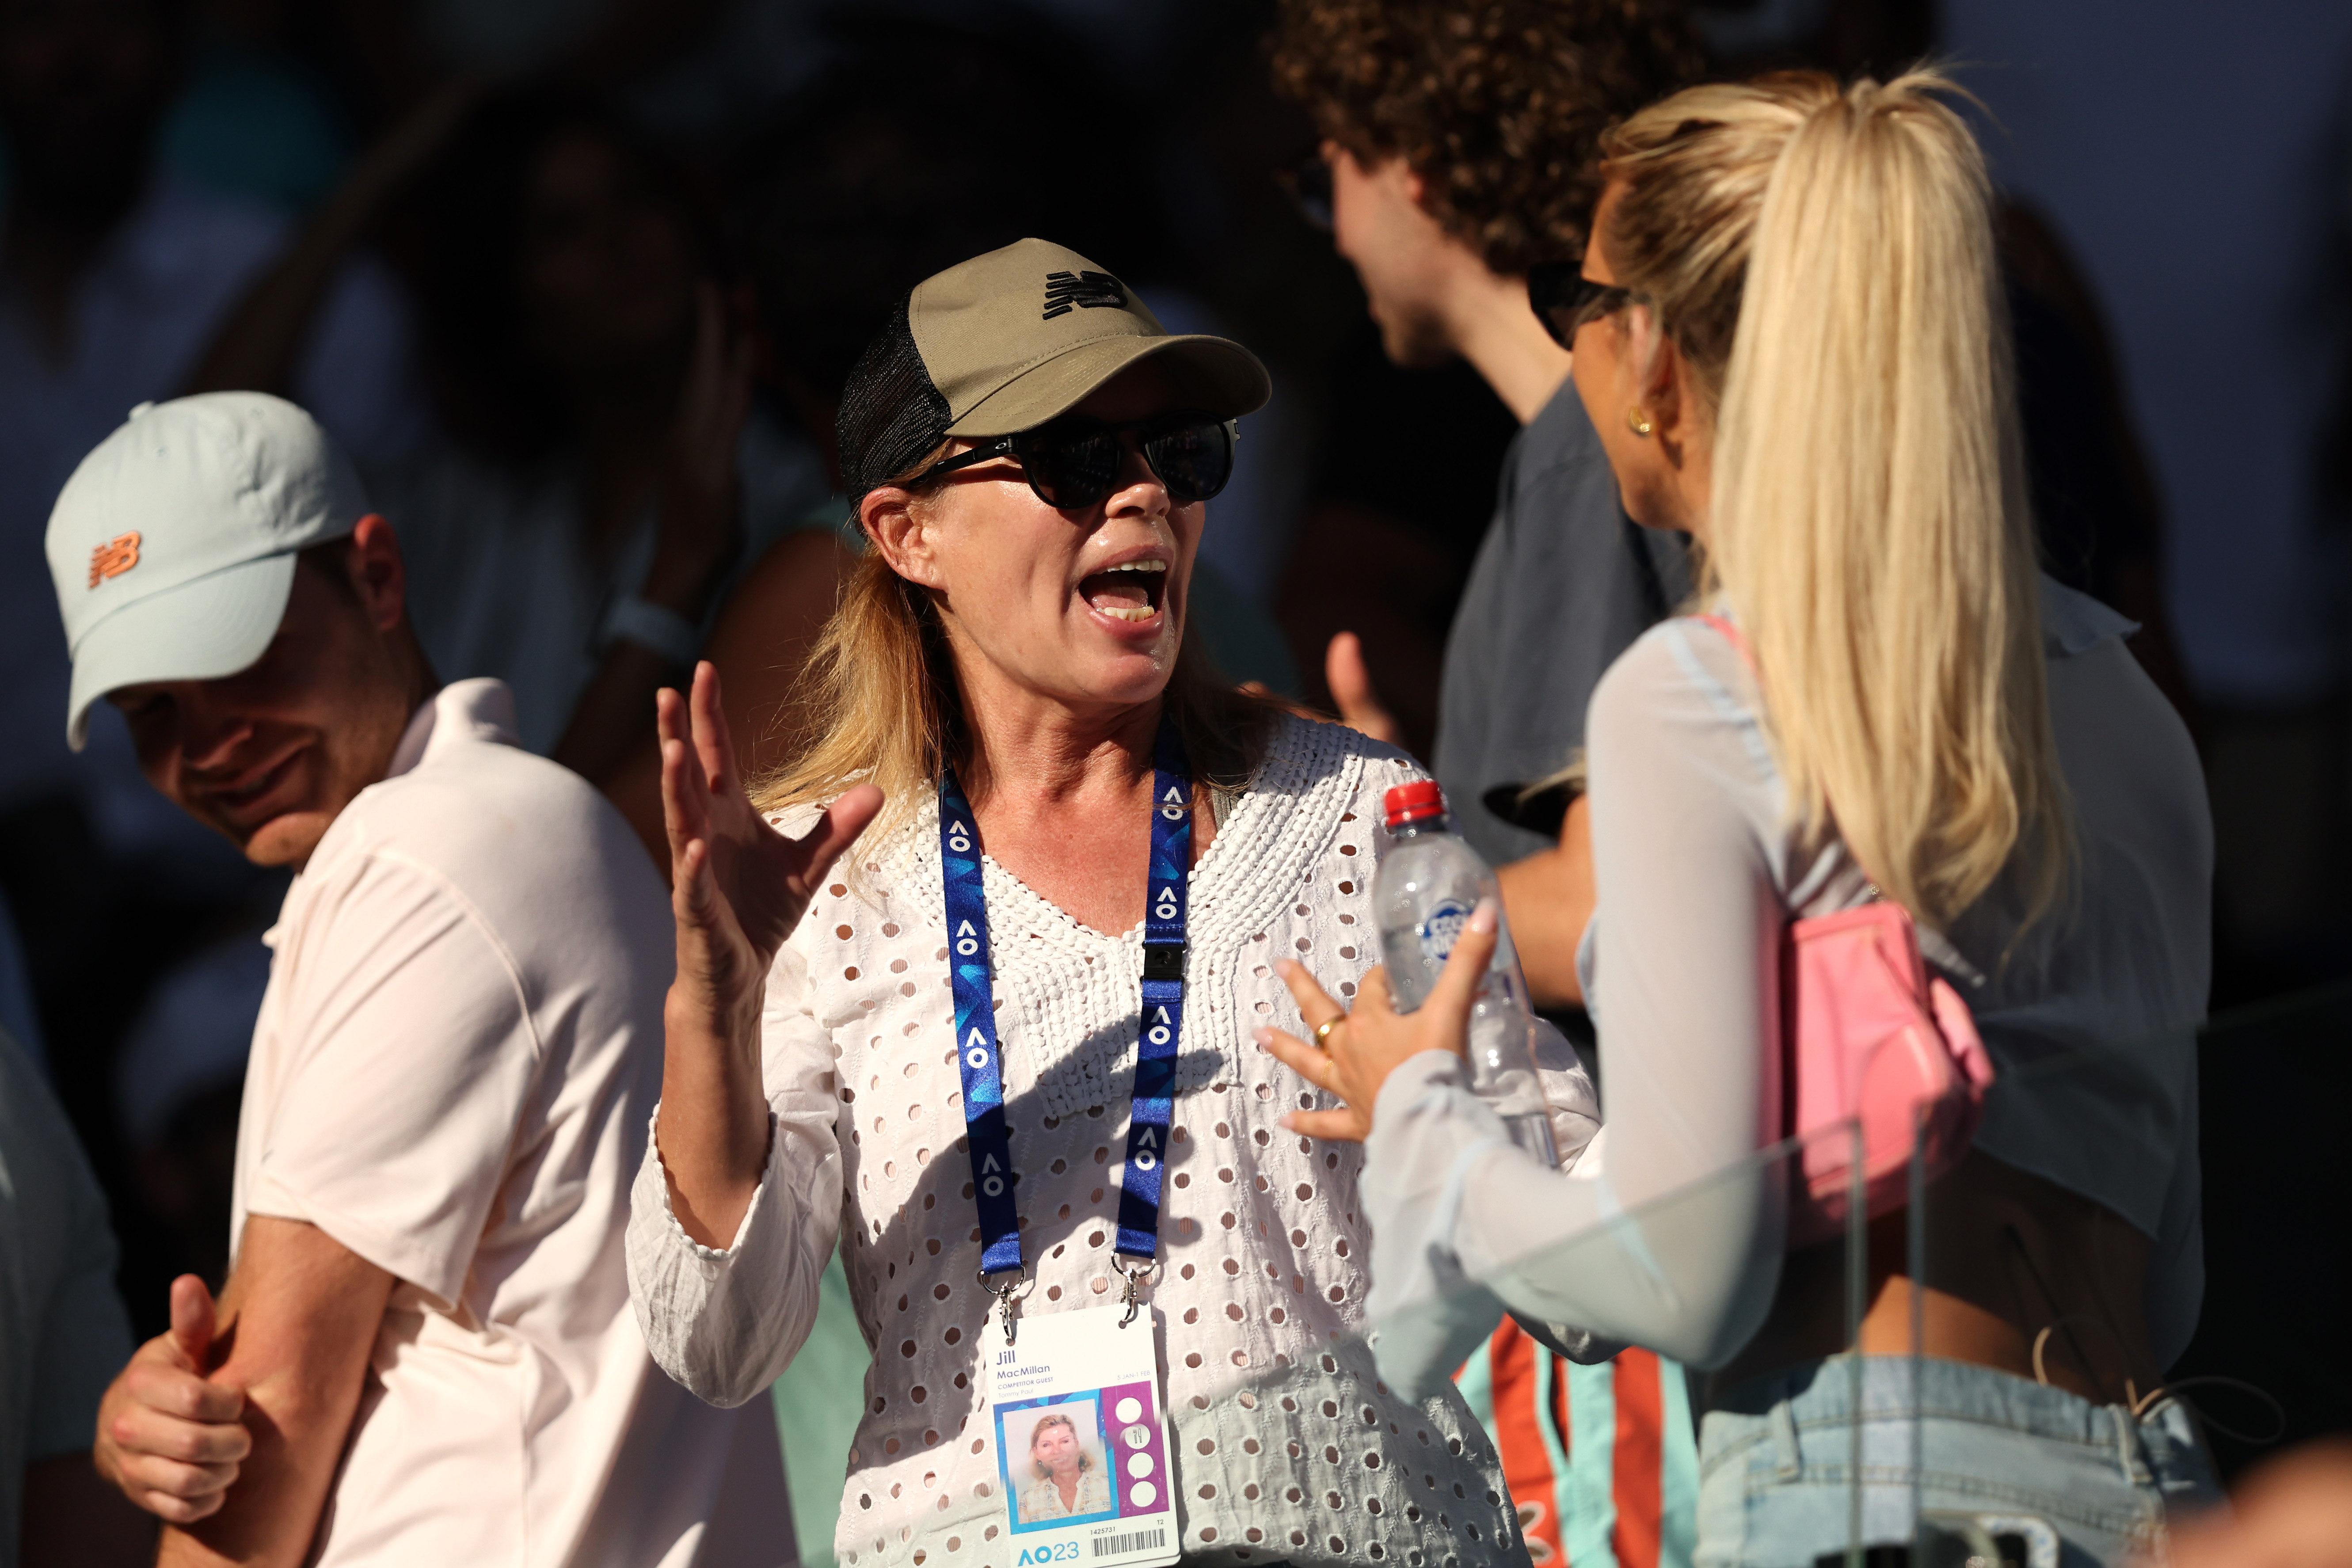 Jill MacMillan engages in a conversation with Tommy Paul's girlfriend Paige Lorenze a the 2023 Australian Open on January 25, 2023, in Melbourne, Australia. | Source: Getty Images